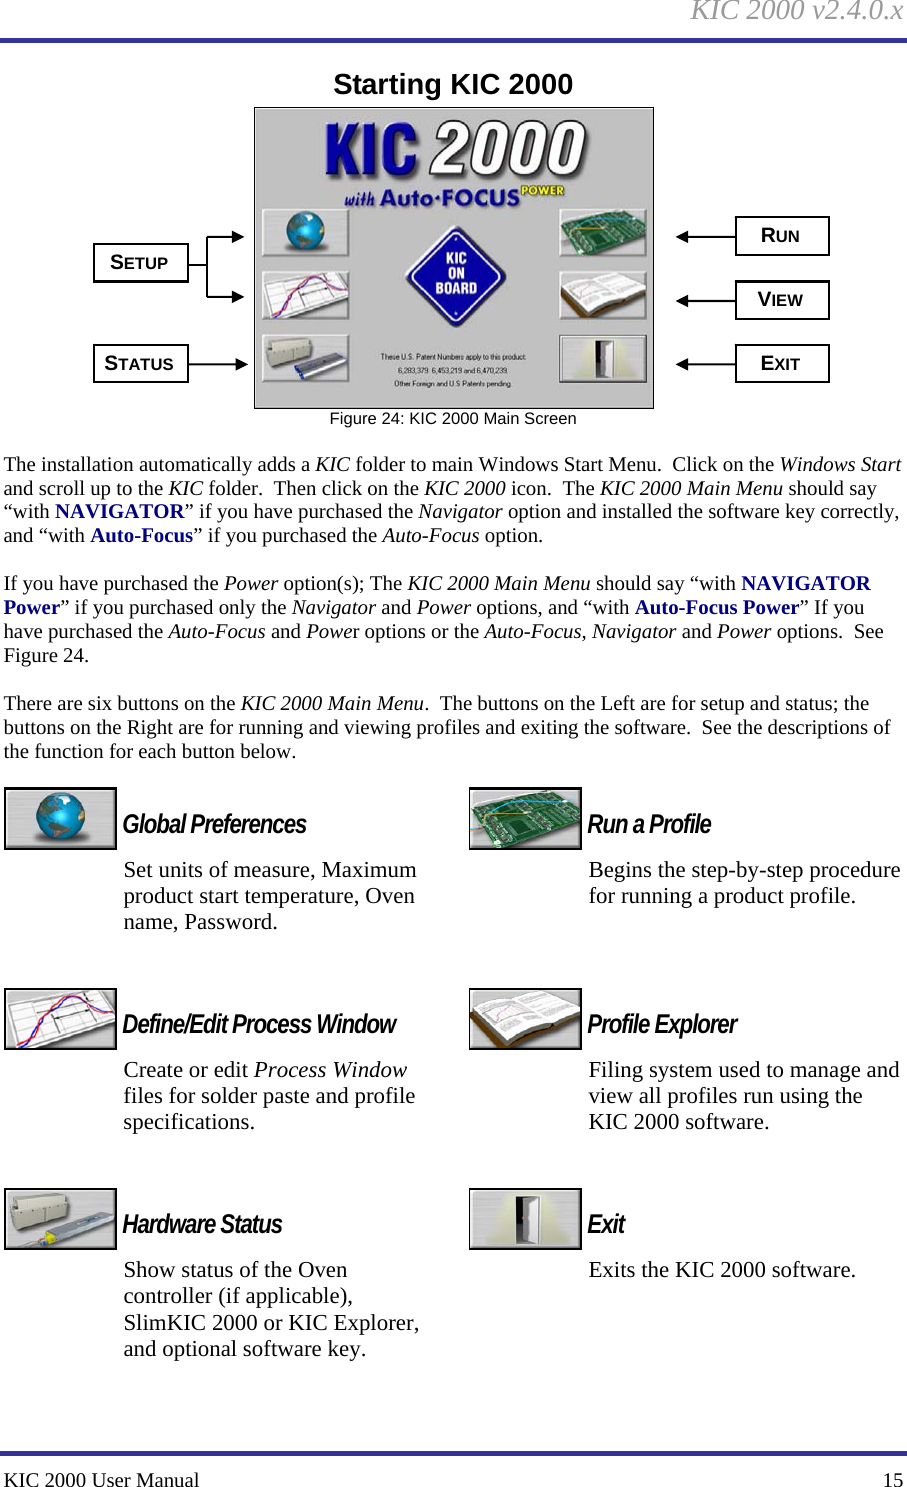 KIC 2000 v2.4.0.x KIC 2000 User Manual    15 Starting KIC 2000  Figure 24: KIC 2000 Main Screen  The installation automatically adds a KIC folder to main Windows Start Menu.  Click on the Windows Start and scroll up to the KIC folder.  Then click on the KIC 2000 icon.  The KIC 2000 Main Menu should say “with NAVIGATOR” if you have purchased the Navigator option and installed the software key correctly, and “with Auto-Focus” if you purchased the Auto-Focus option.  If you have purchased the Power option(s); The KIC 2000 Main Menu should say “with NAVIGATOR Power” if you purchased only the Navigator and Power options, and “with Auto-Focus Power” If you have purchased the Auto-Focus and Power options or the Auto-Focus, Navigator and Power options.  See Figure 24.    There are six buttons on the KIC 2000 Main Menu.  The buttons on the Left are for setup and status; the buttons on the Right are for running and viewing profiles and exiting the software.  See the descriptions of the function for each button below.   Global Preferences Set units of measure, Maximum product start temperature, Oven name, Password.    Define/Edit Process Window Create or edit Process Window files for solder paste and profile specifications.    Hardware Status Show status of the Oven controller (if applicable), SlimKIC 2000 or KIC Explorer, and optional software key.    Run a Profile Begins the step-by-step procedure for running a product profile.     Profile Explorer Filing system used to manage and view all profiles run using the KIC 2000 software.    Exit Exits the KIC 2000 software.      SETUP STATUS RUN VIEW EXIT 